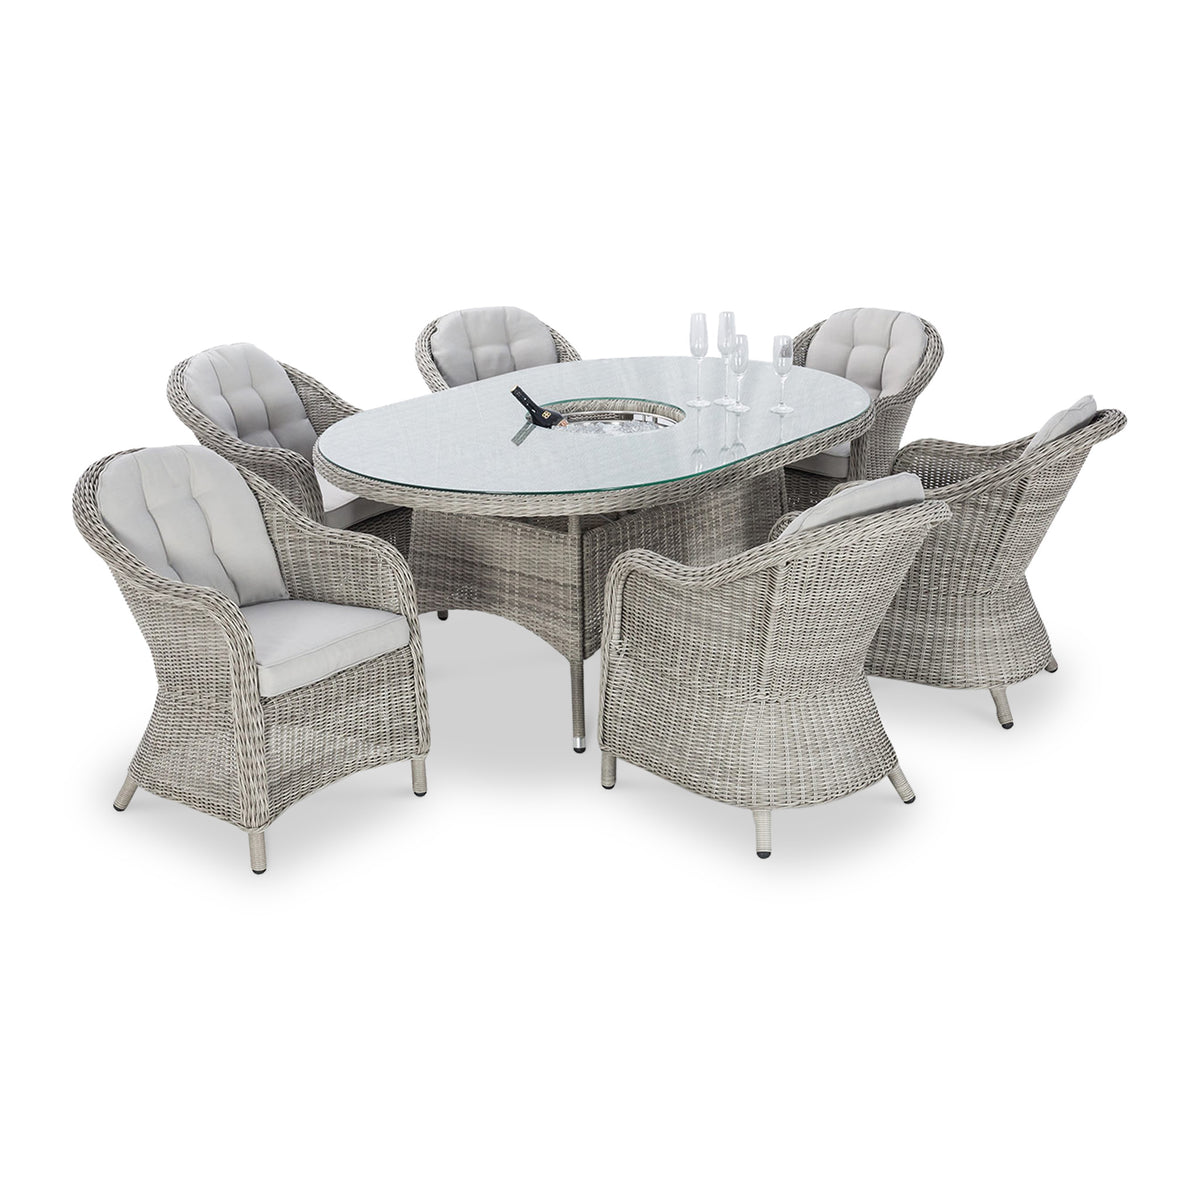 Maze Oxford 6 Seat Oval Rattan Dining Set with Lazy Susan from Roseland Furniture